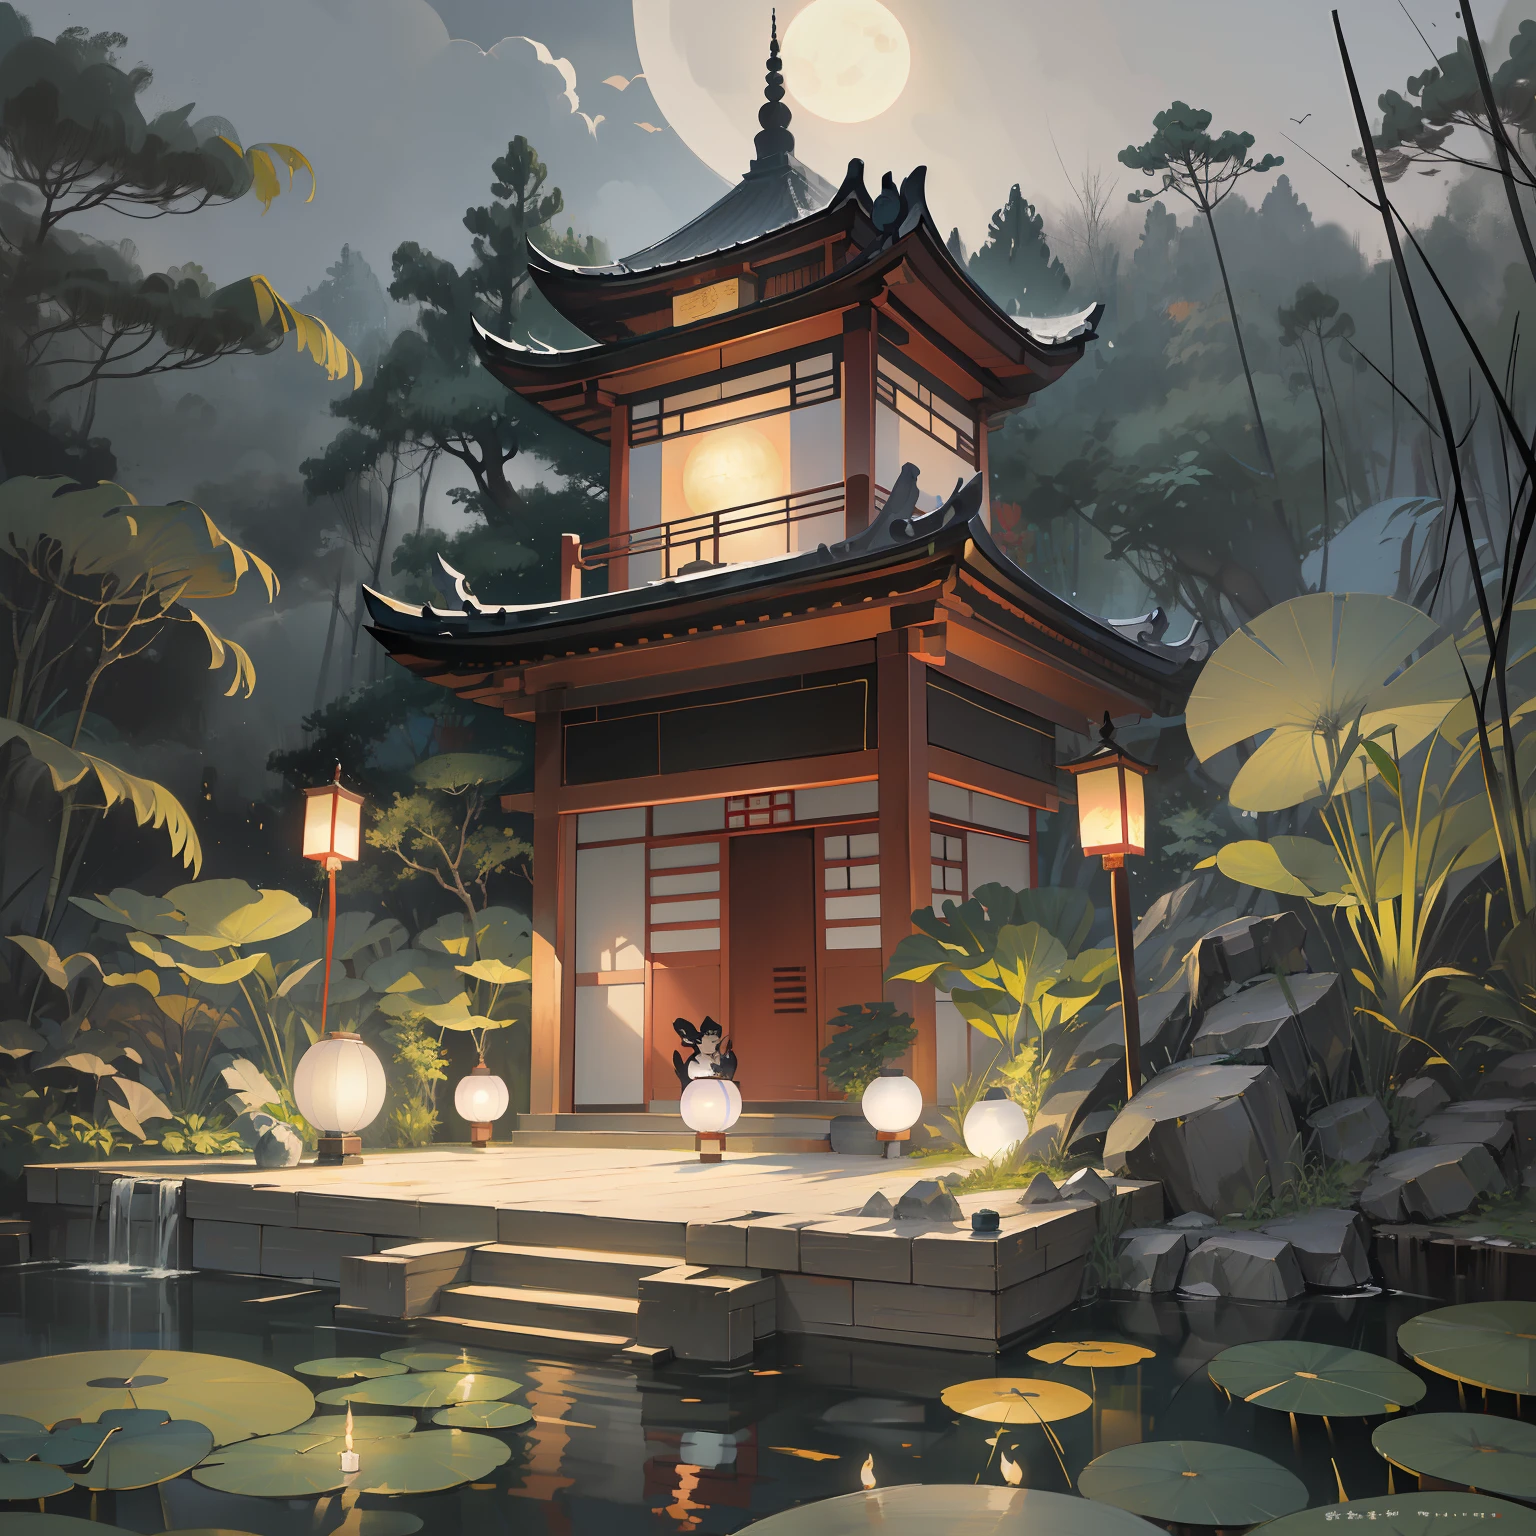 masterpiece,best quality,Chinese martial arts style,an asian night scene with lanterns and water lilies,asian pond with many lanterns and boatsa night scene with many lights and boats in the water, Lake surface, lotus flowers,beautiful night scene,(((Chinese martial arts style))), with vast sky, continuous mountains and steep cliffs, ink wash style, outline light, atmospheric atmosphere, depth of field, mist rising, bamboo, pine trees, octagonal stone pavilion, waterfall flowing water,big full moon,(No color) , Monochrome, light color,